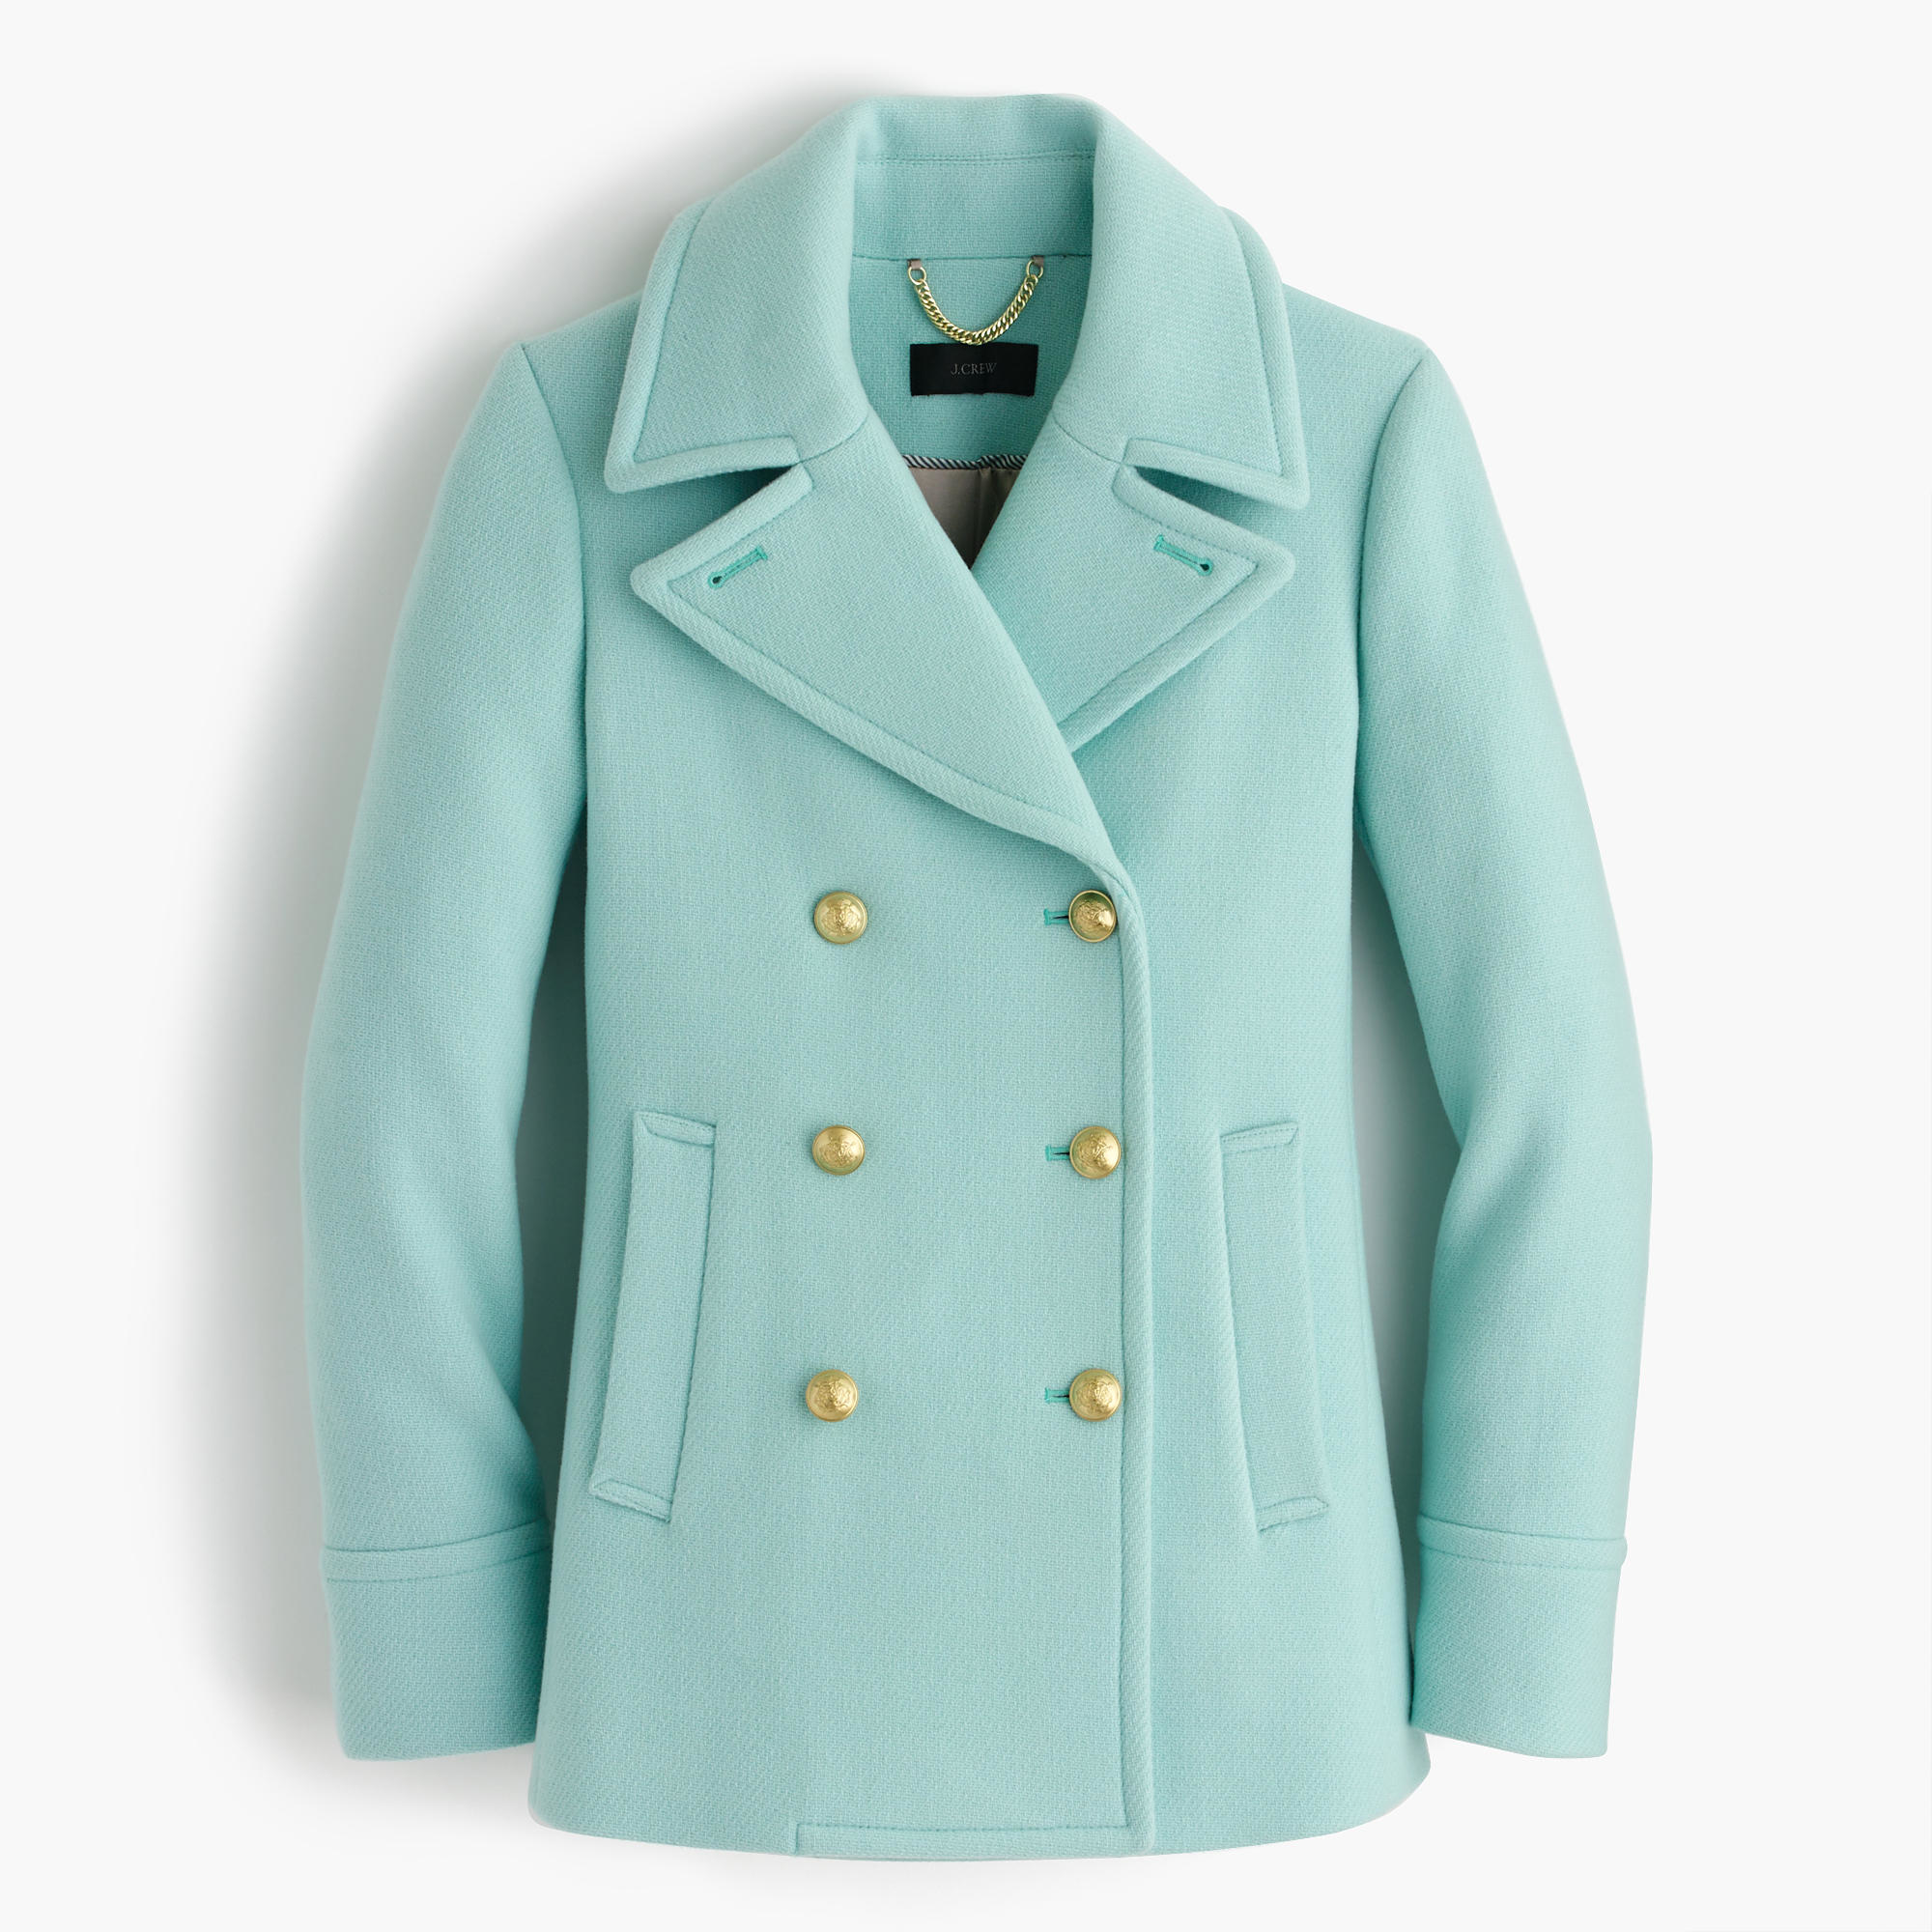 J.crew Tall Majesty Peacoat In Stadium Cloth in Blue | Lyst